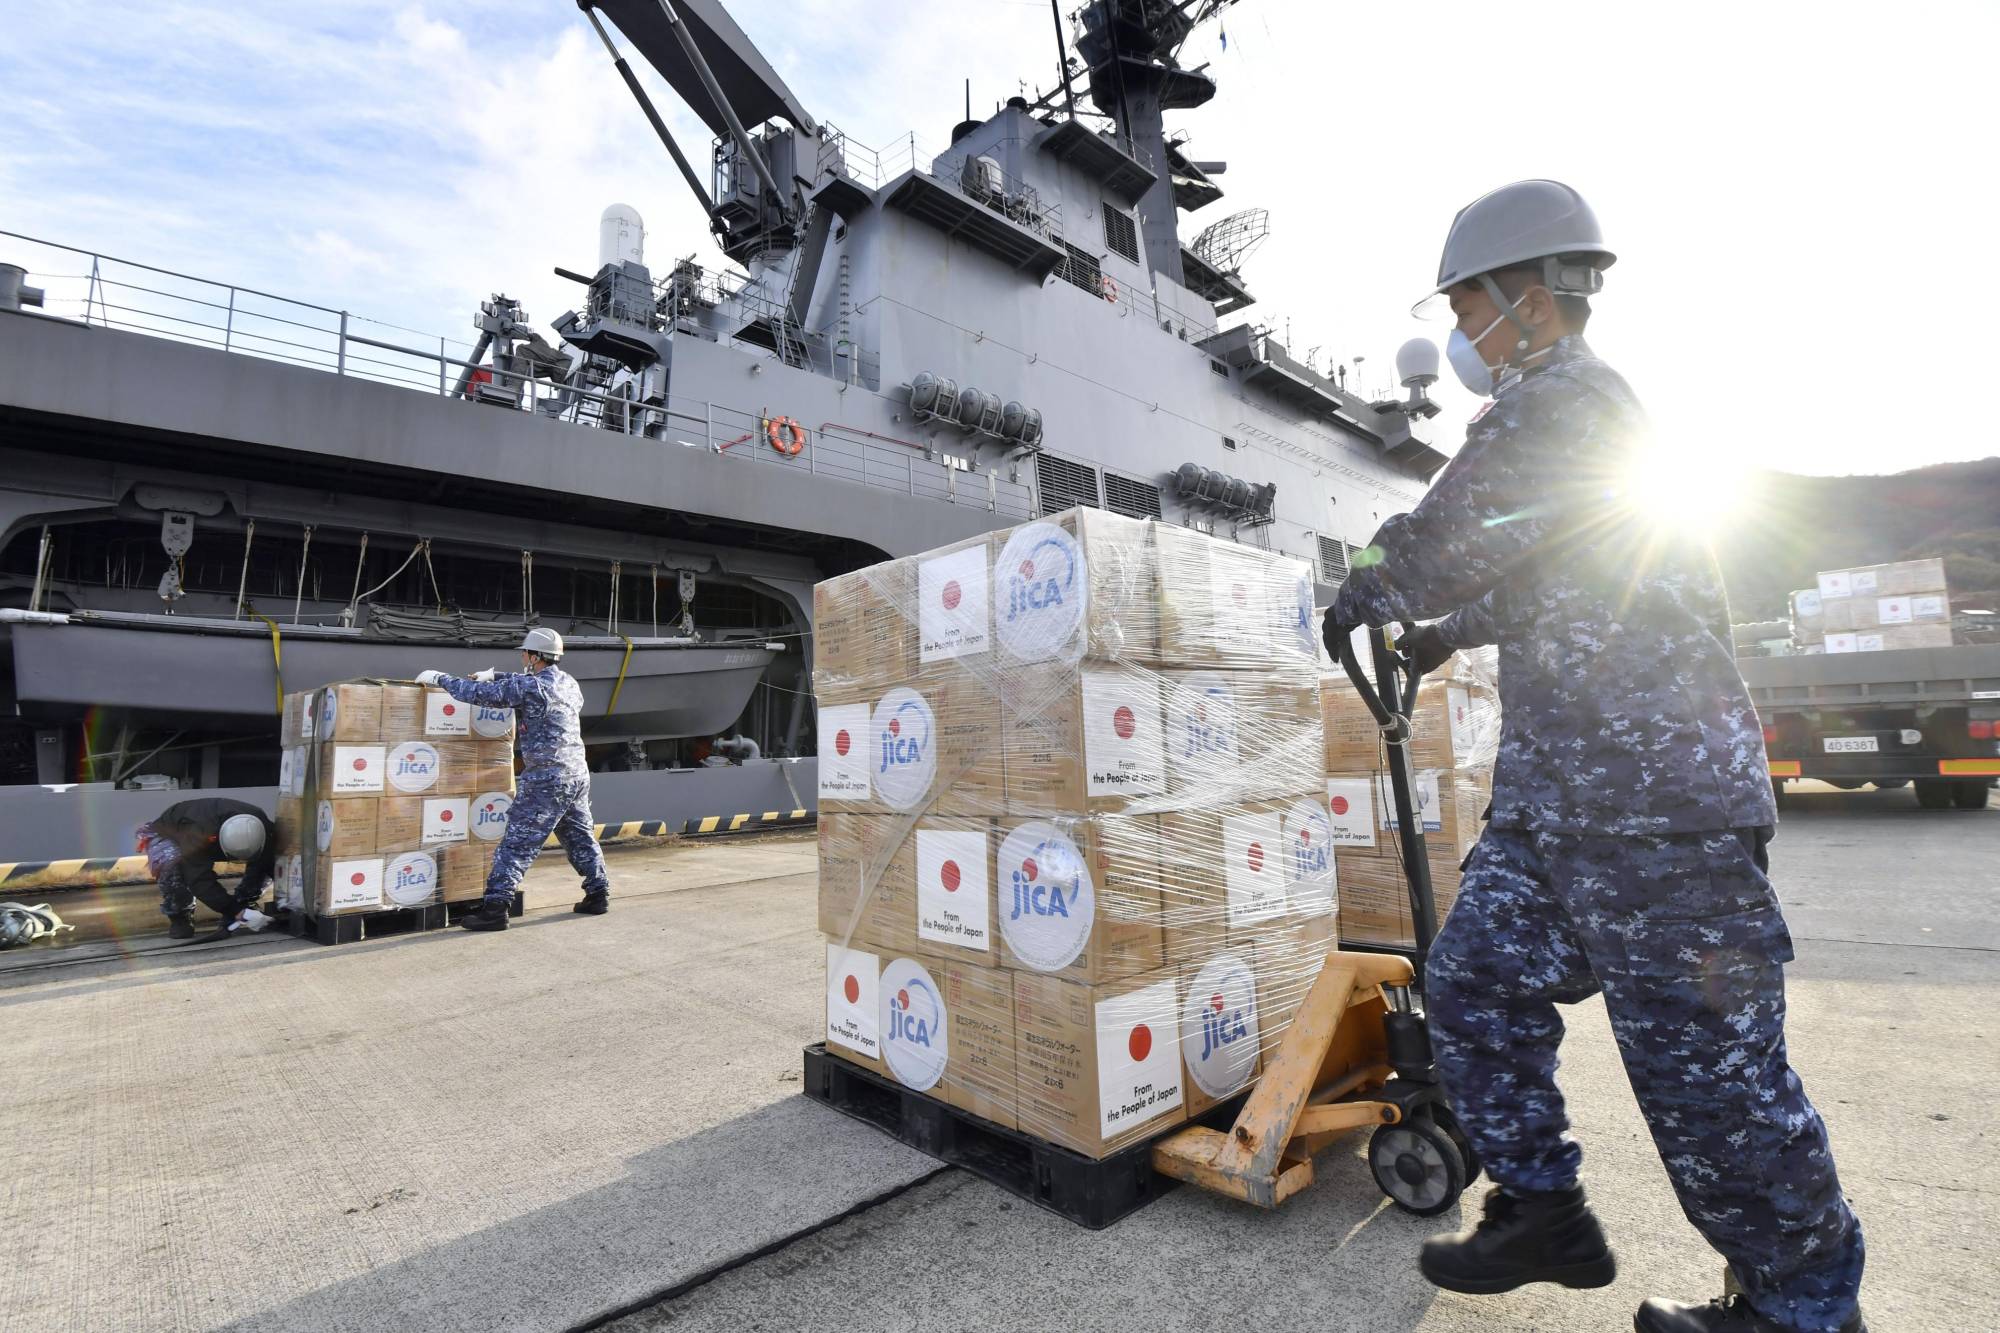 Self-Defense Force members load supplies onto a transport vessel docked at the Kure base in Hiroshima Prefecture Monday. The vessel departed for Tonga later in the day. | KYODO